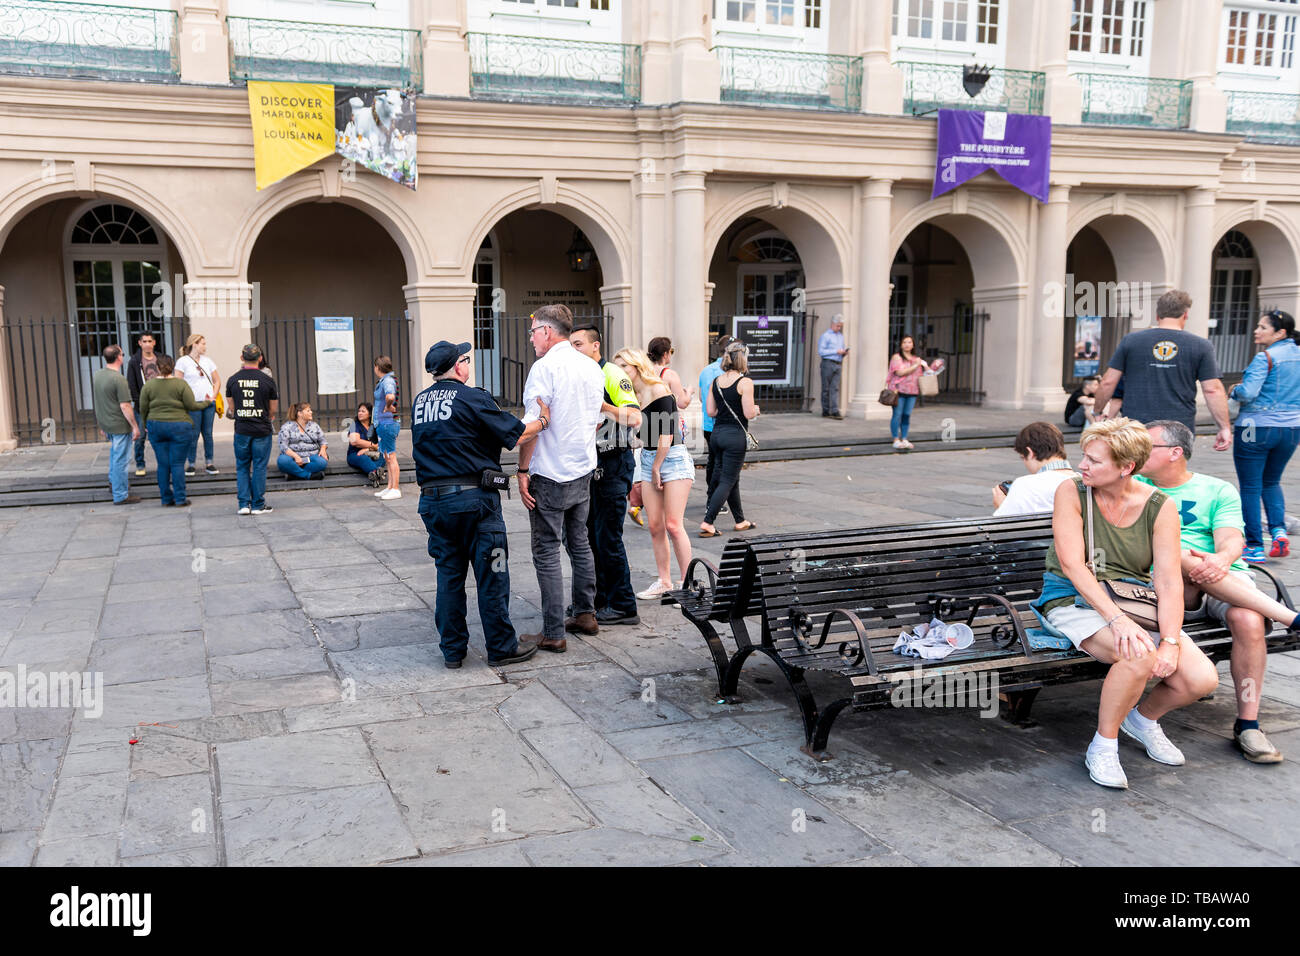 New Orleans, USA - April 22, 2018: Jackson Square in Louisiana famous town during day with EMS security police guard officer arresting man Stock Photo